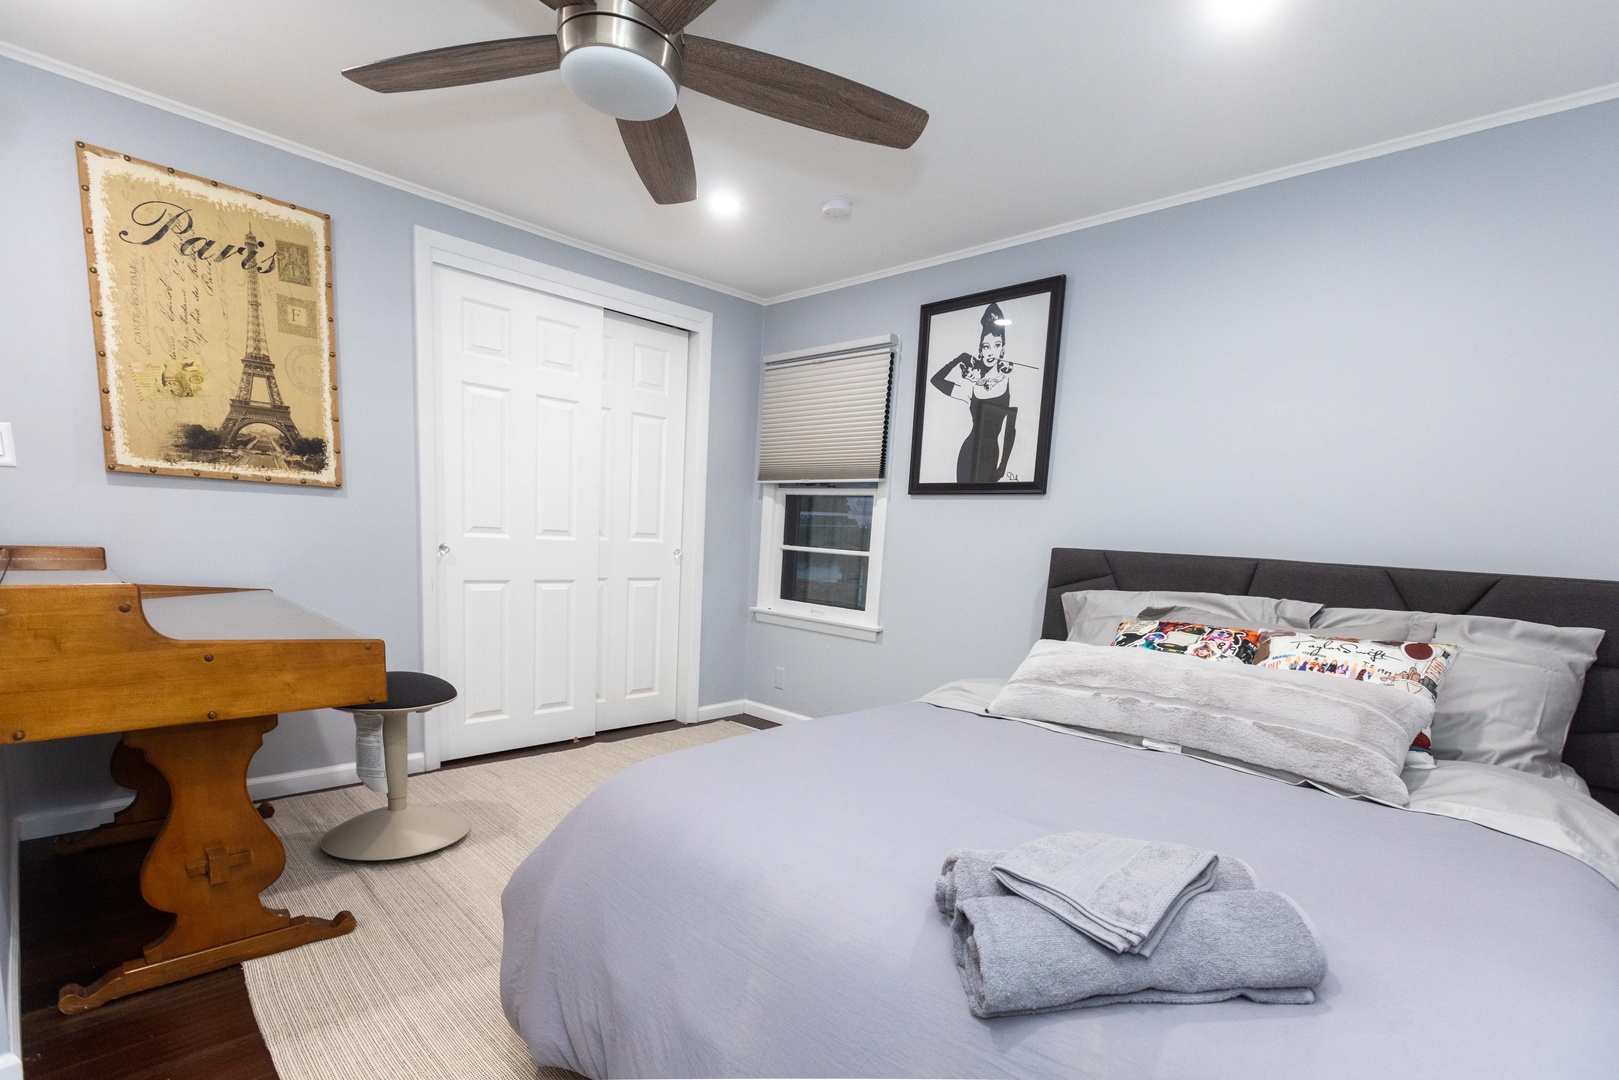 The bedroom includes a full-sized bed, desk workspace, & ceiling fan